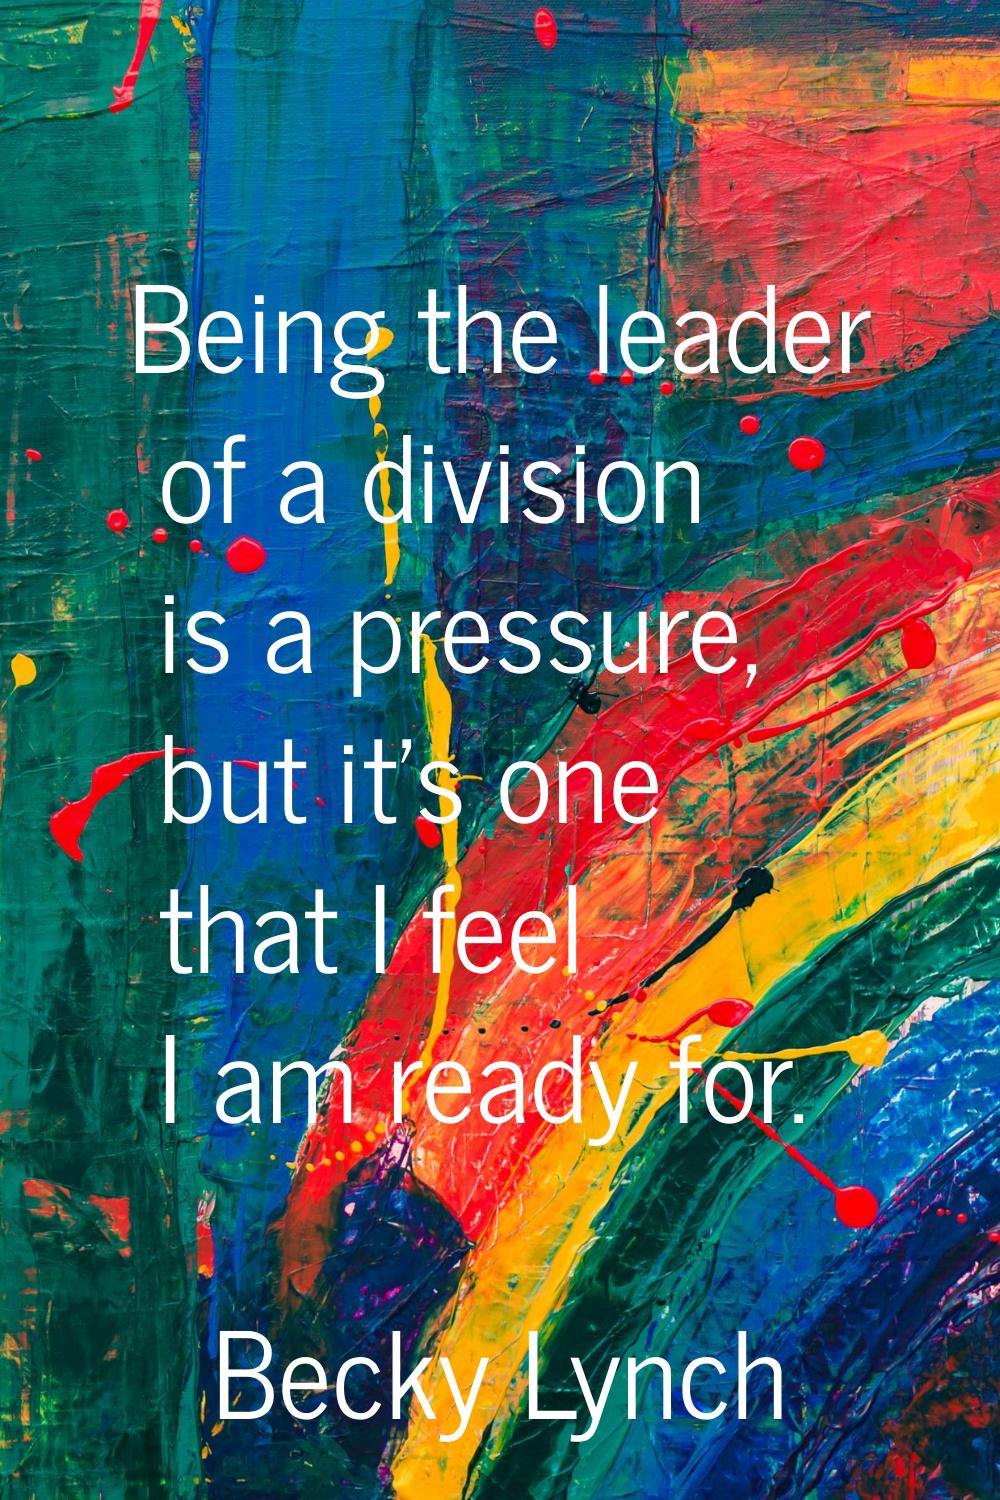 Being the leader of a division is a pressure, but it's one that I feel I am ready for.